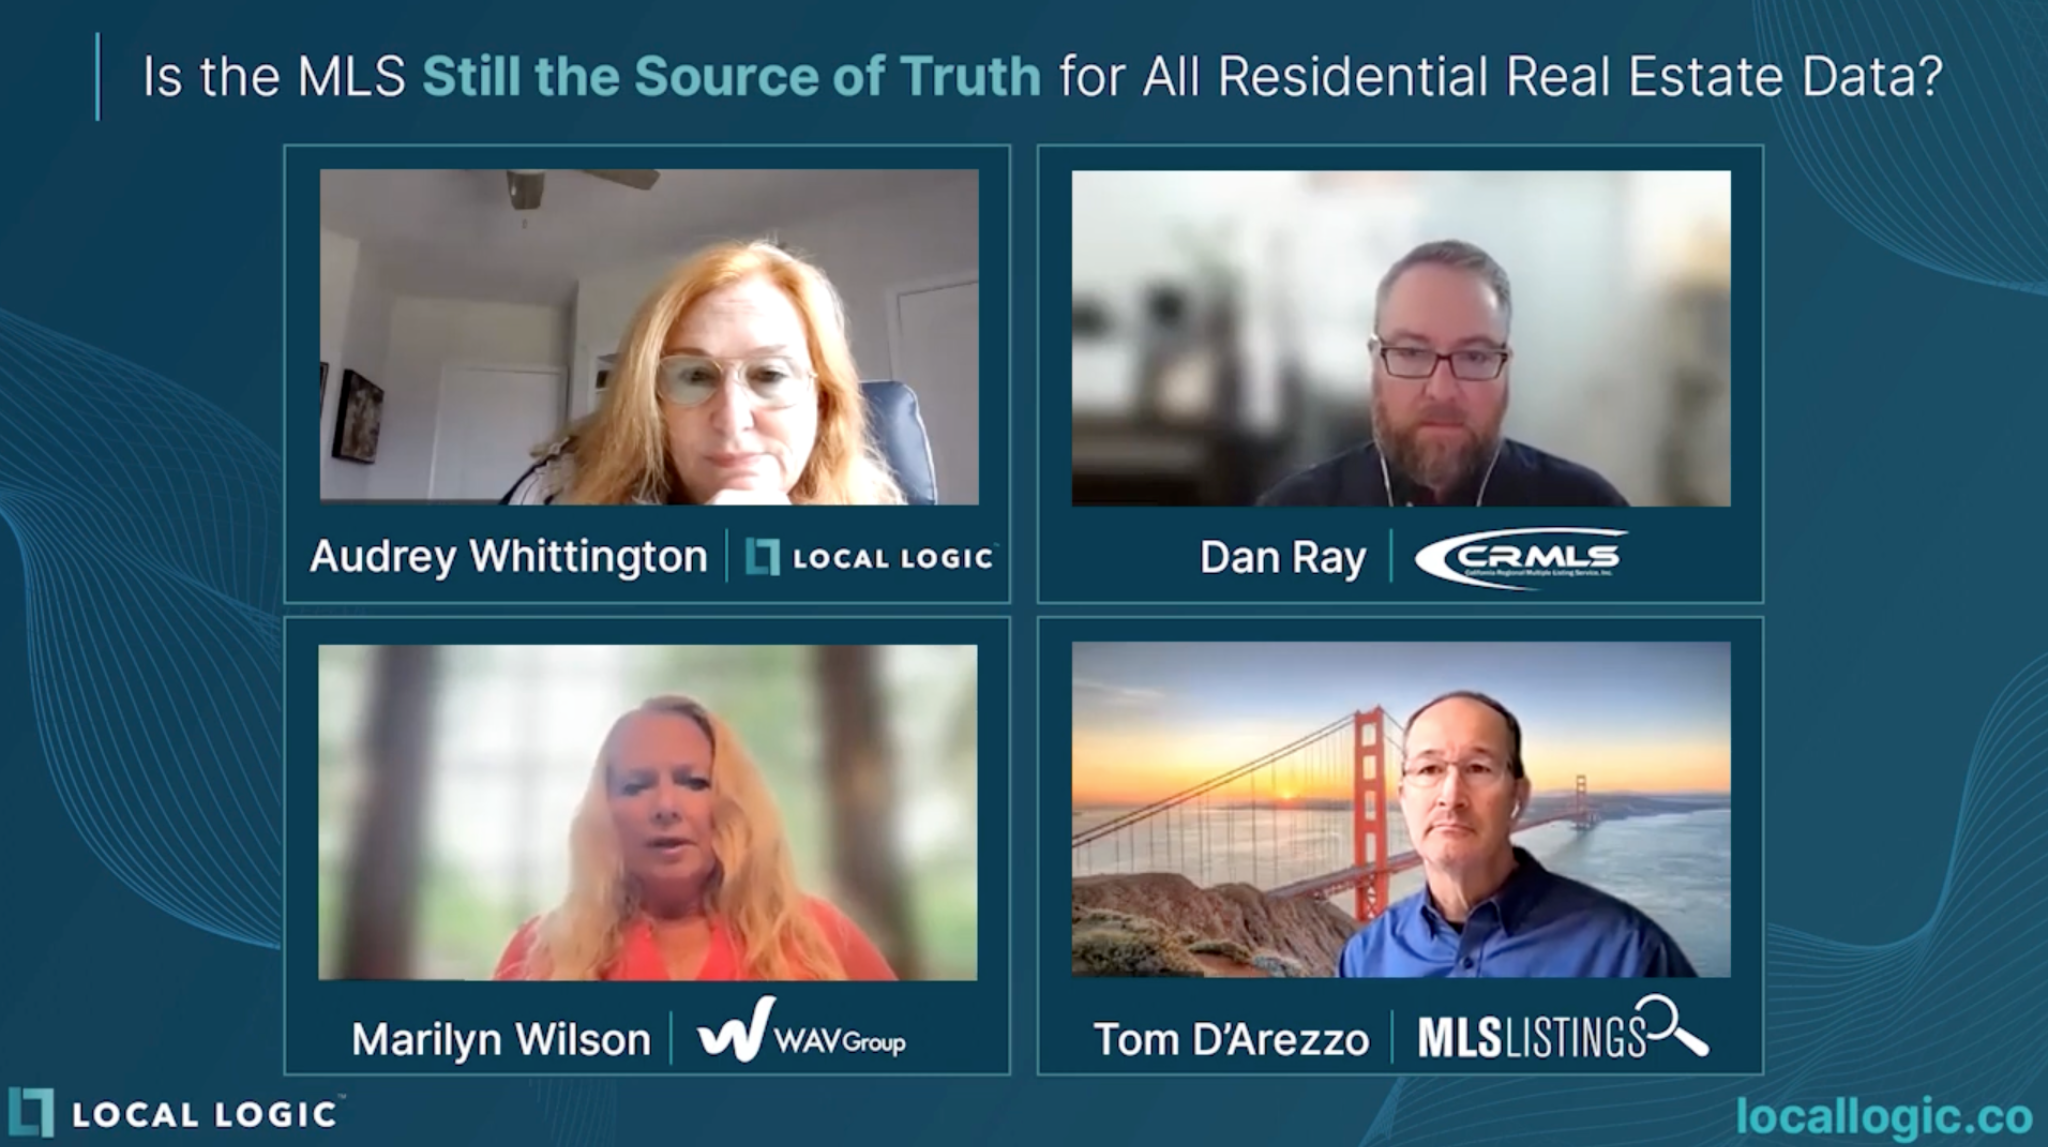 Promotional graphic to promote a webinar on MLS as the source of truth featuring real estate leaders from CRMLS (Dan Ray), WAVGroup (Marilyn WIlson), MLSListings (Tom D'Arezzo), and Local Logic (Audrey Whittington)